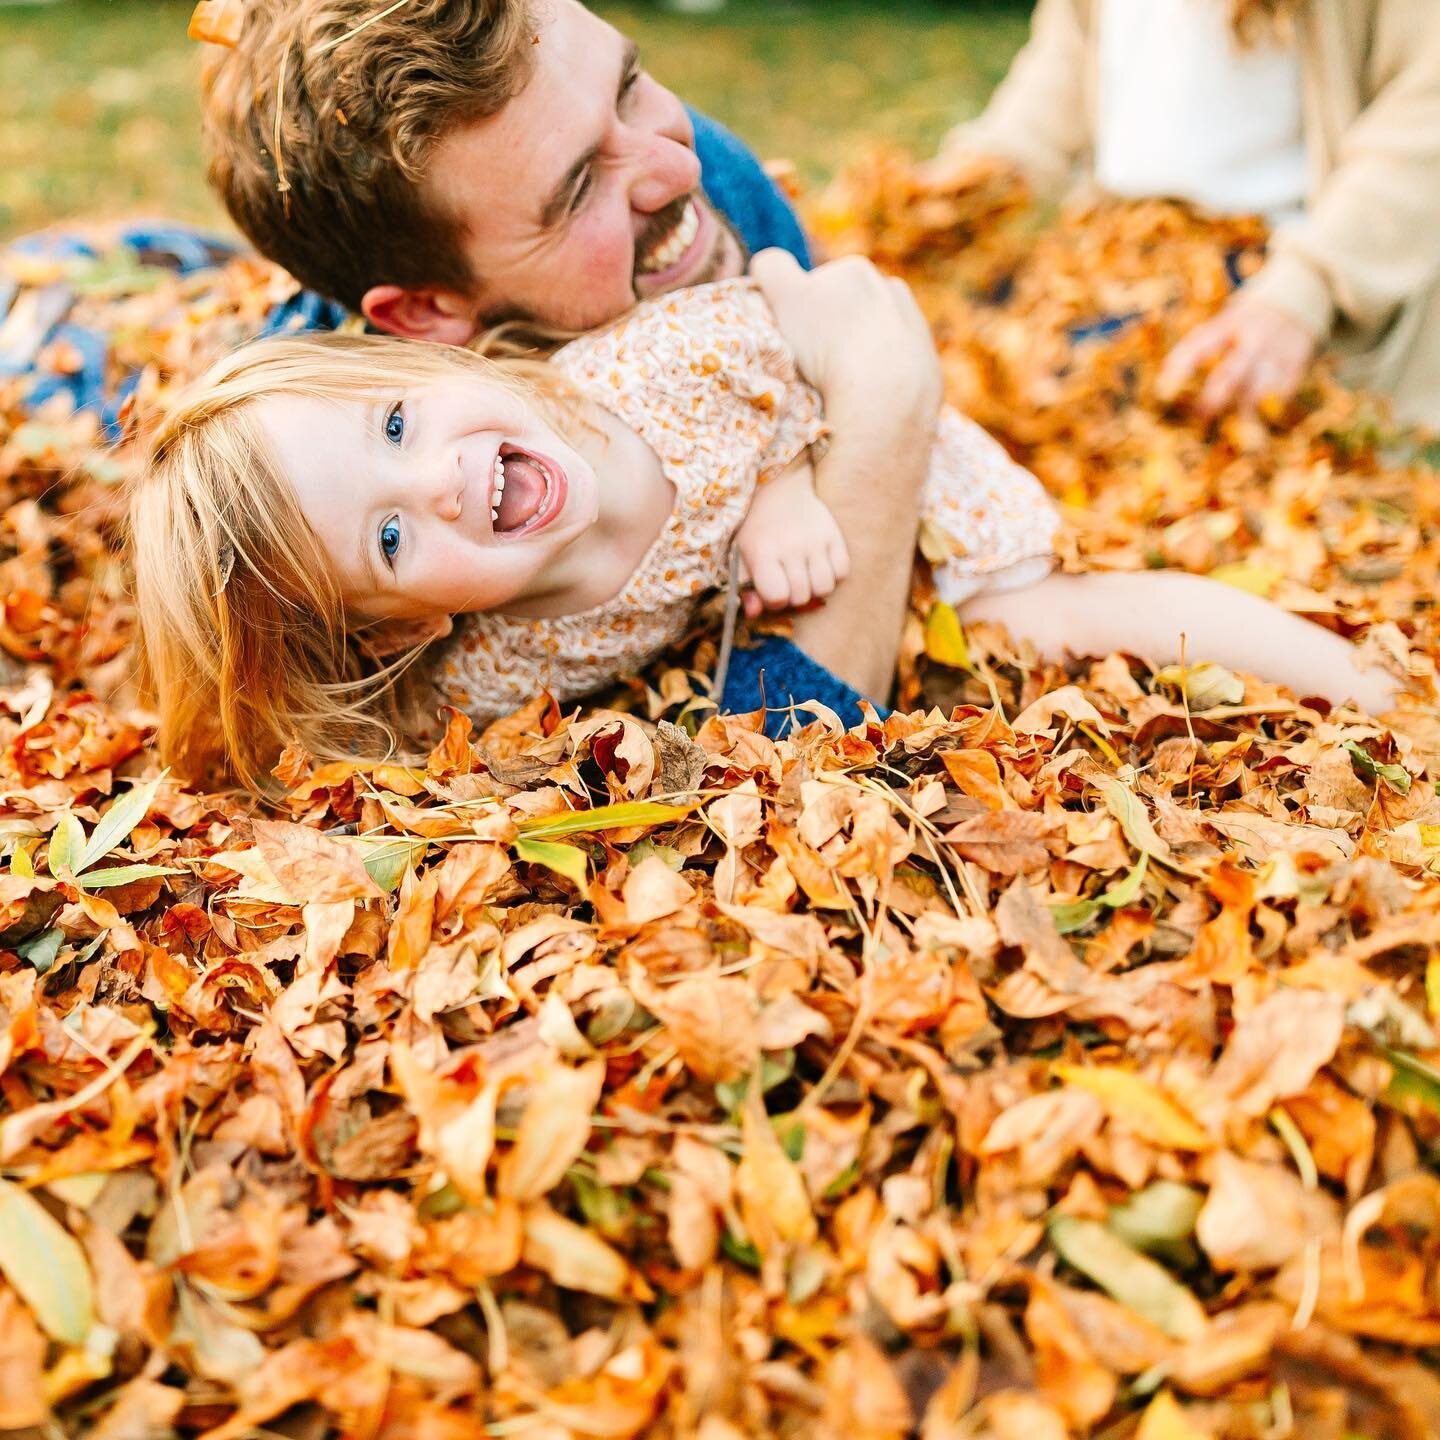 Titled: Amy Was Almost an Unwelcome Guest Until Lily Decided That Jumping in a Leaf Pile Was a Waaaay More Fun Idea Than Taking Family Photos

&hellip; and Lily was totally and completely right.🍂🍁 These moments are timeless and priceless!🫶

&bull;